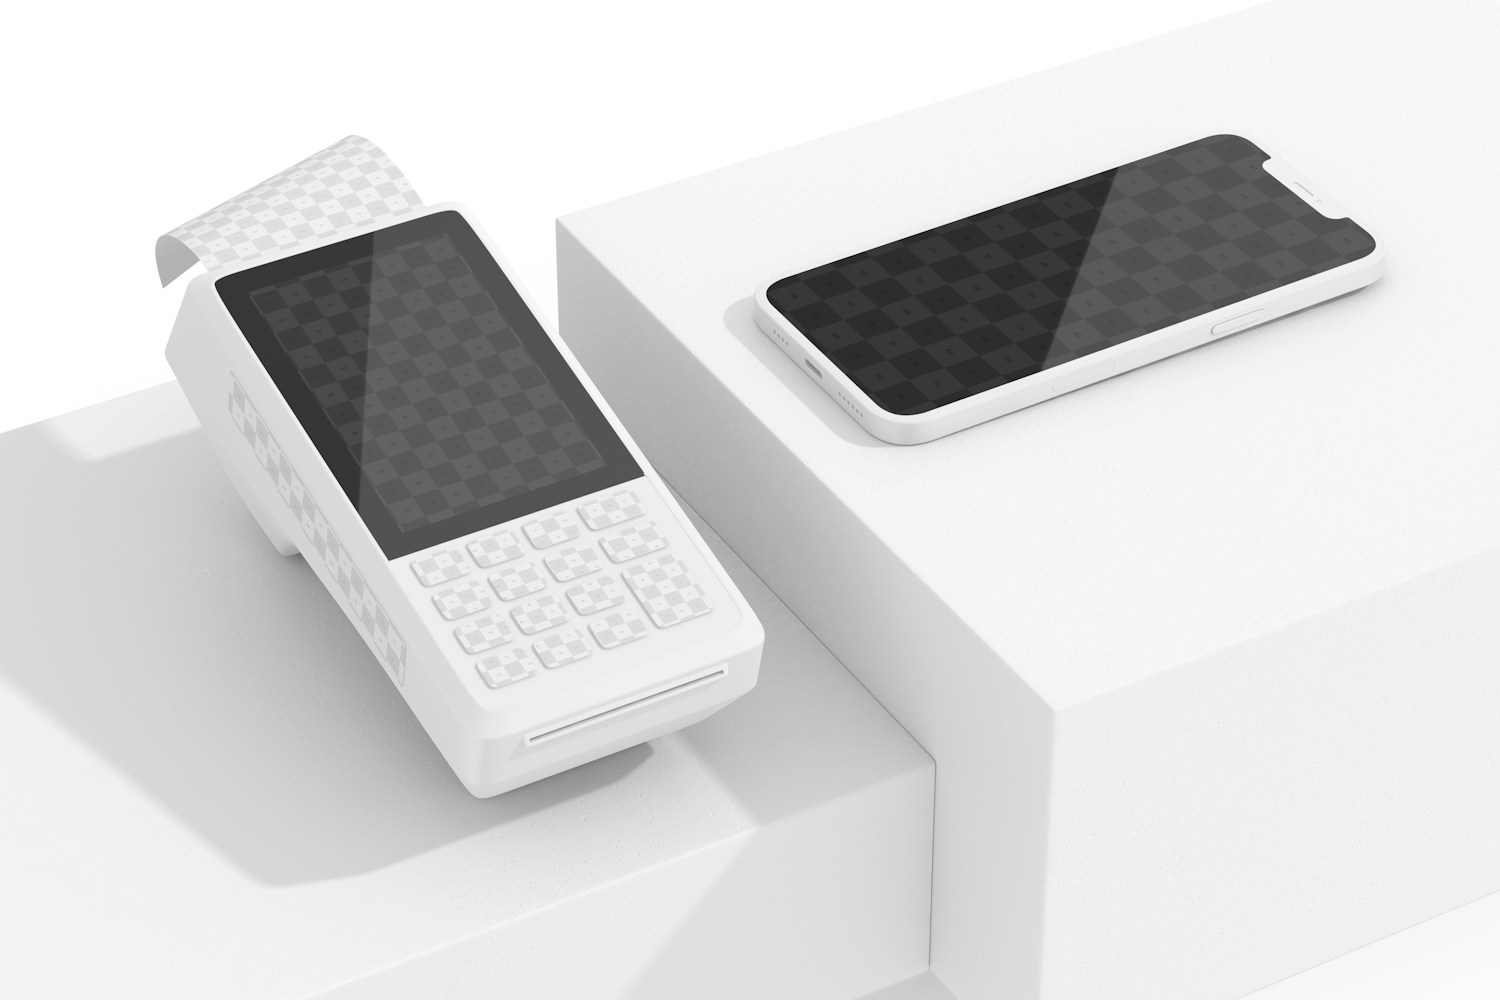 Payment Device with Smartphone Mockup, on Surface